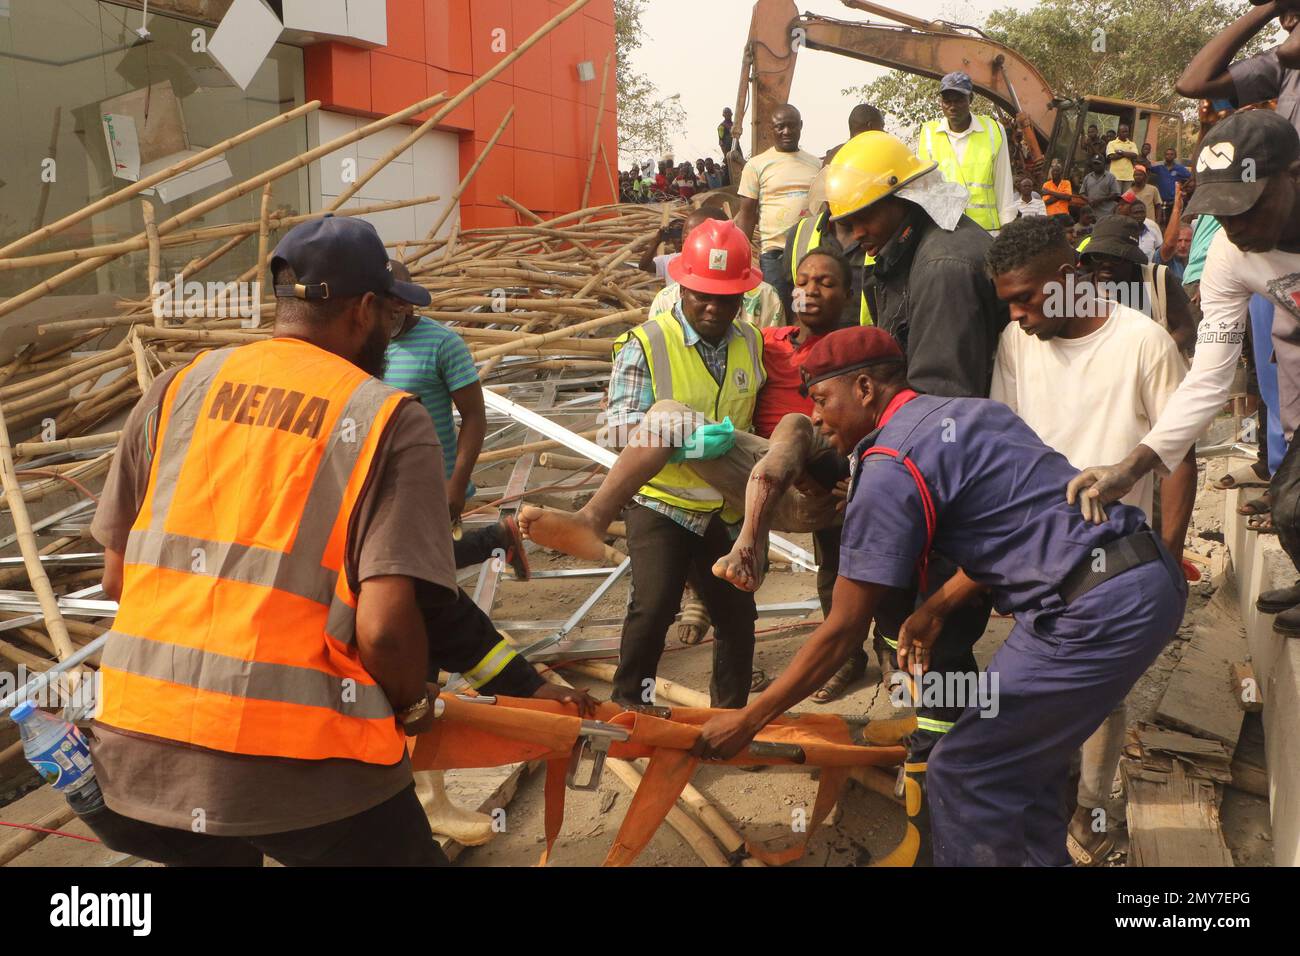 Rescue teams at the site of a 2-story building under construction that collapsed in Abuja, Nigeria’s capital city, Feb. 2, 2023. One person was confirmed dead, four persons rescued alive with serious injury and many were trapped under the rubbles after the two-story building collapsed. Nigeria. Stock Photo